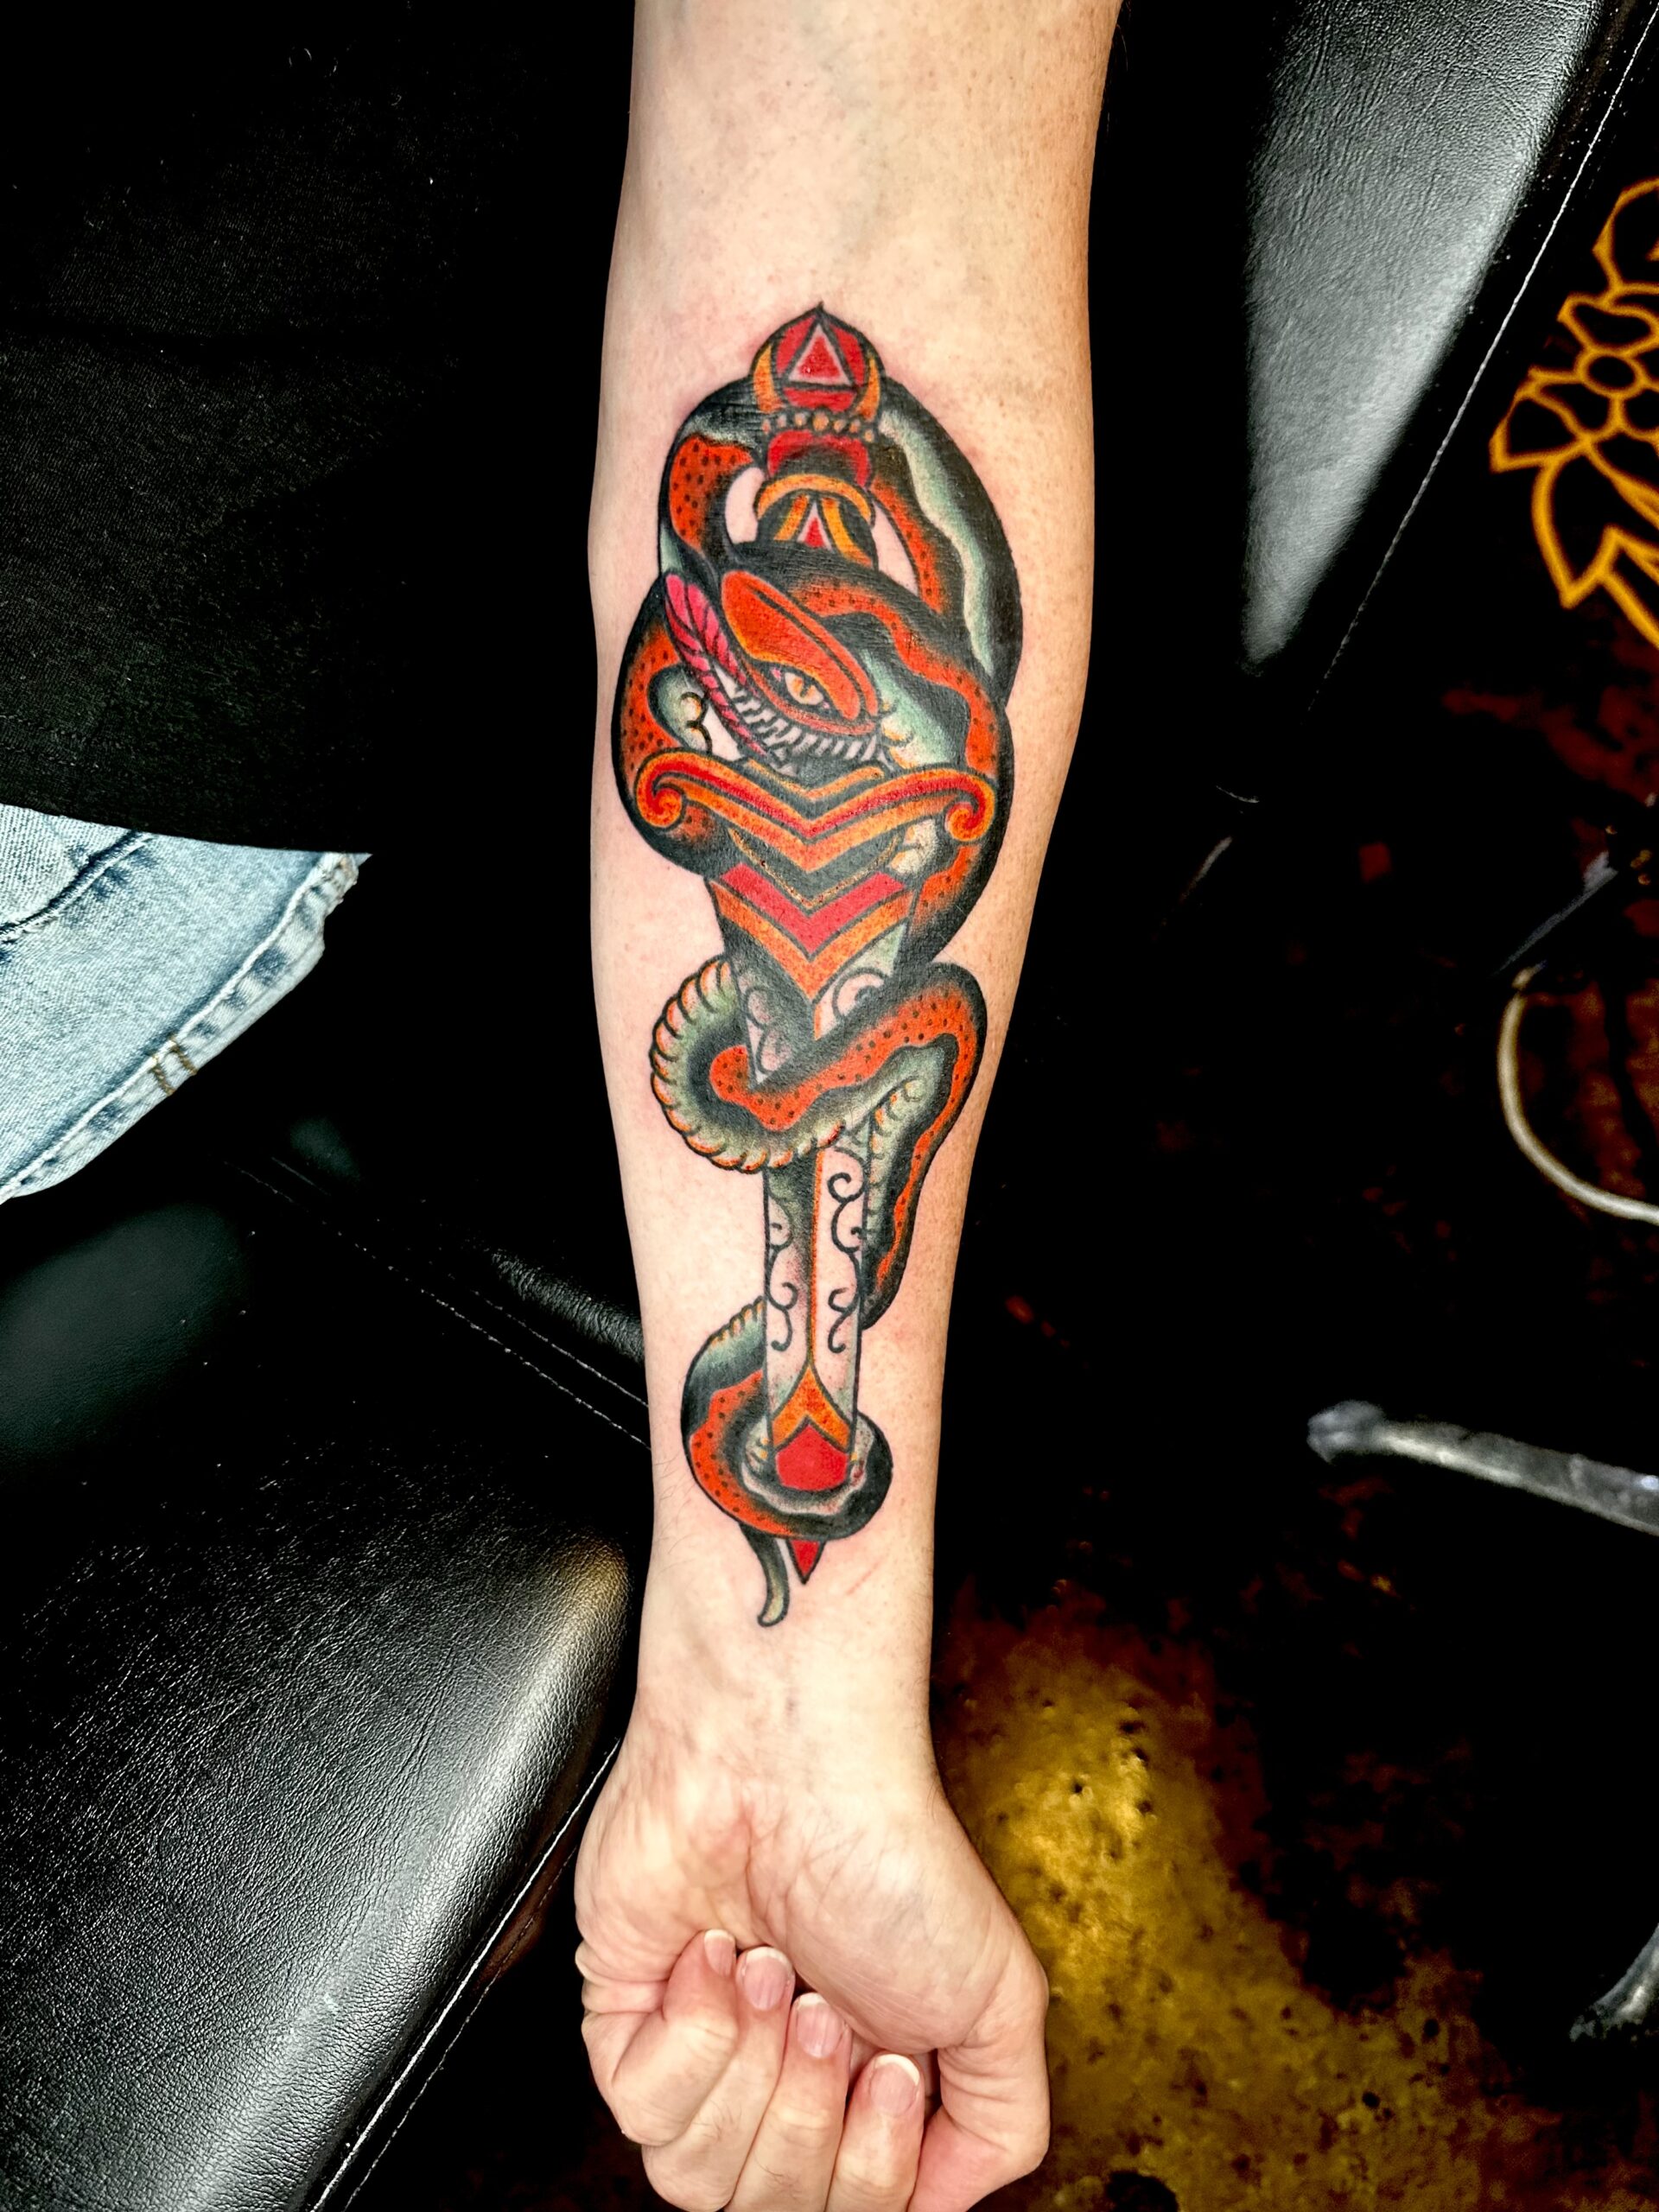 tattoo of a snake and a sword